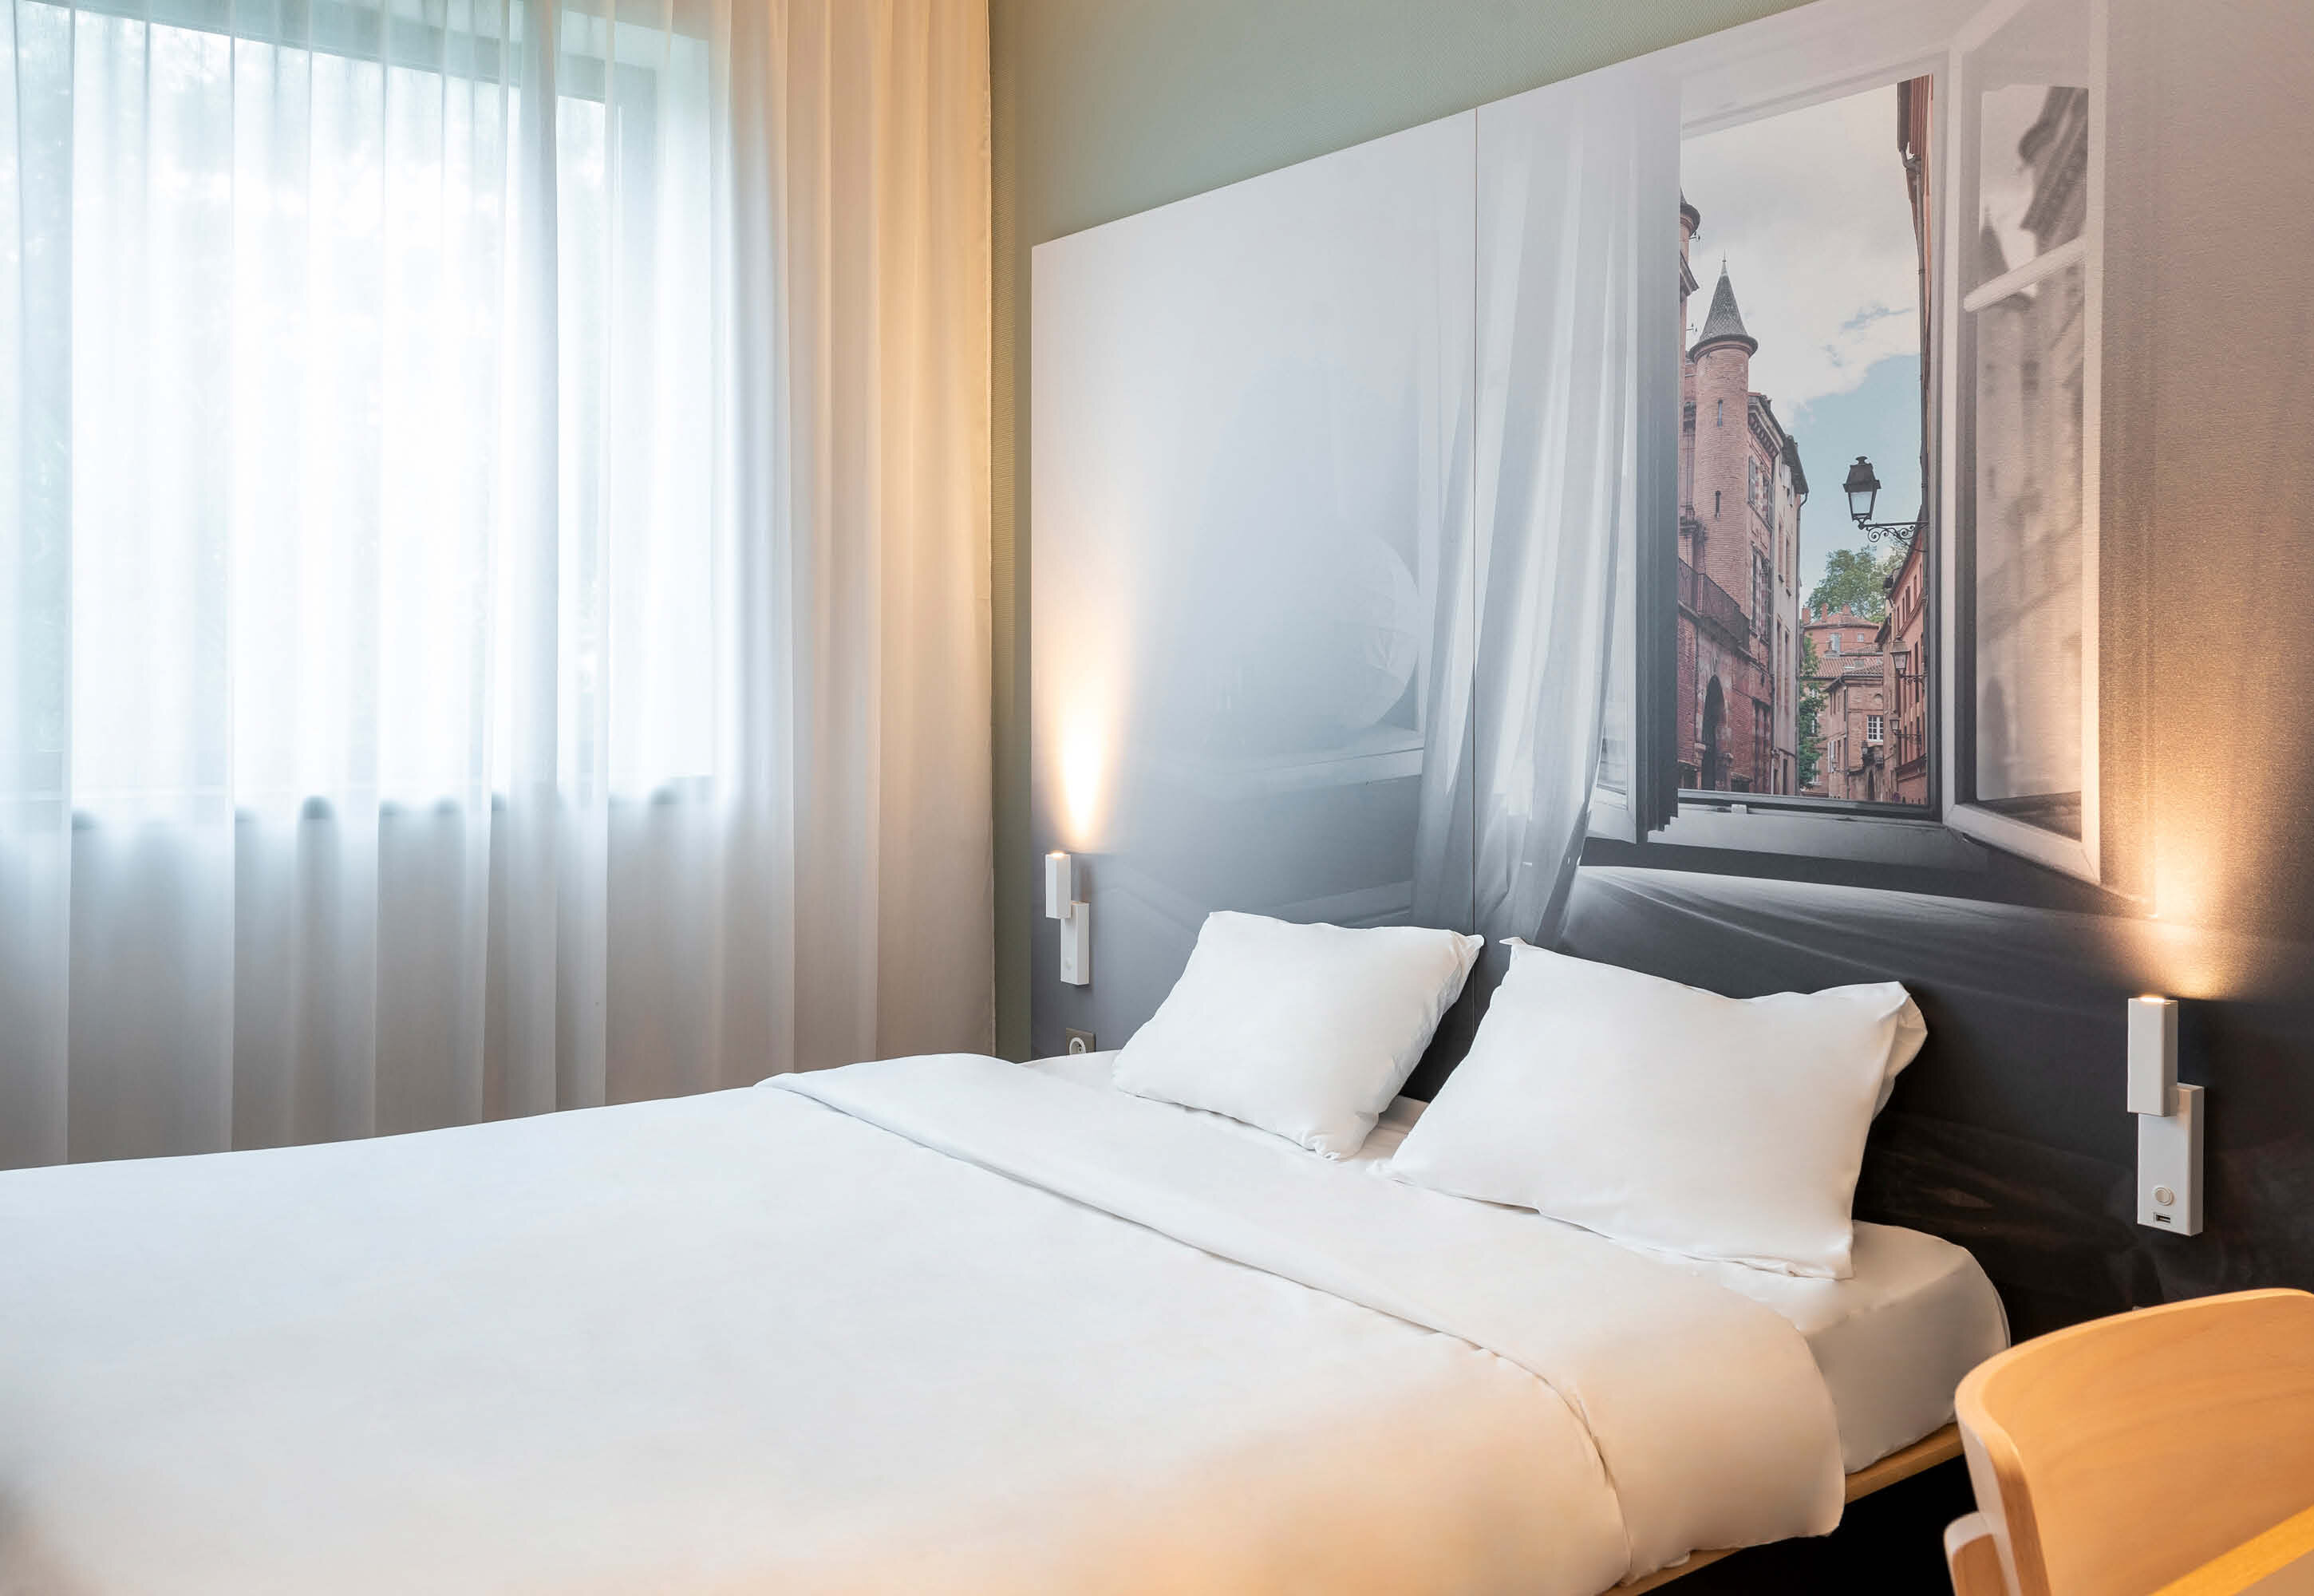 Images B&B HOTEL Toulouse Basso Cambo